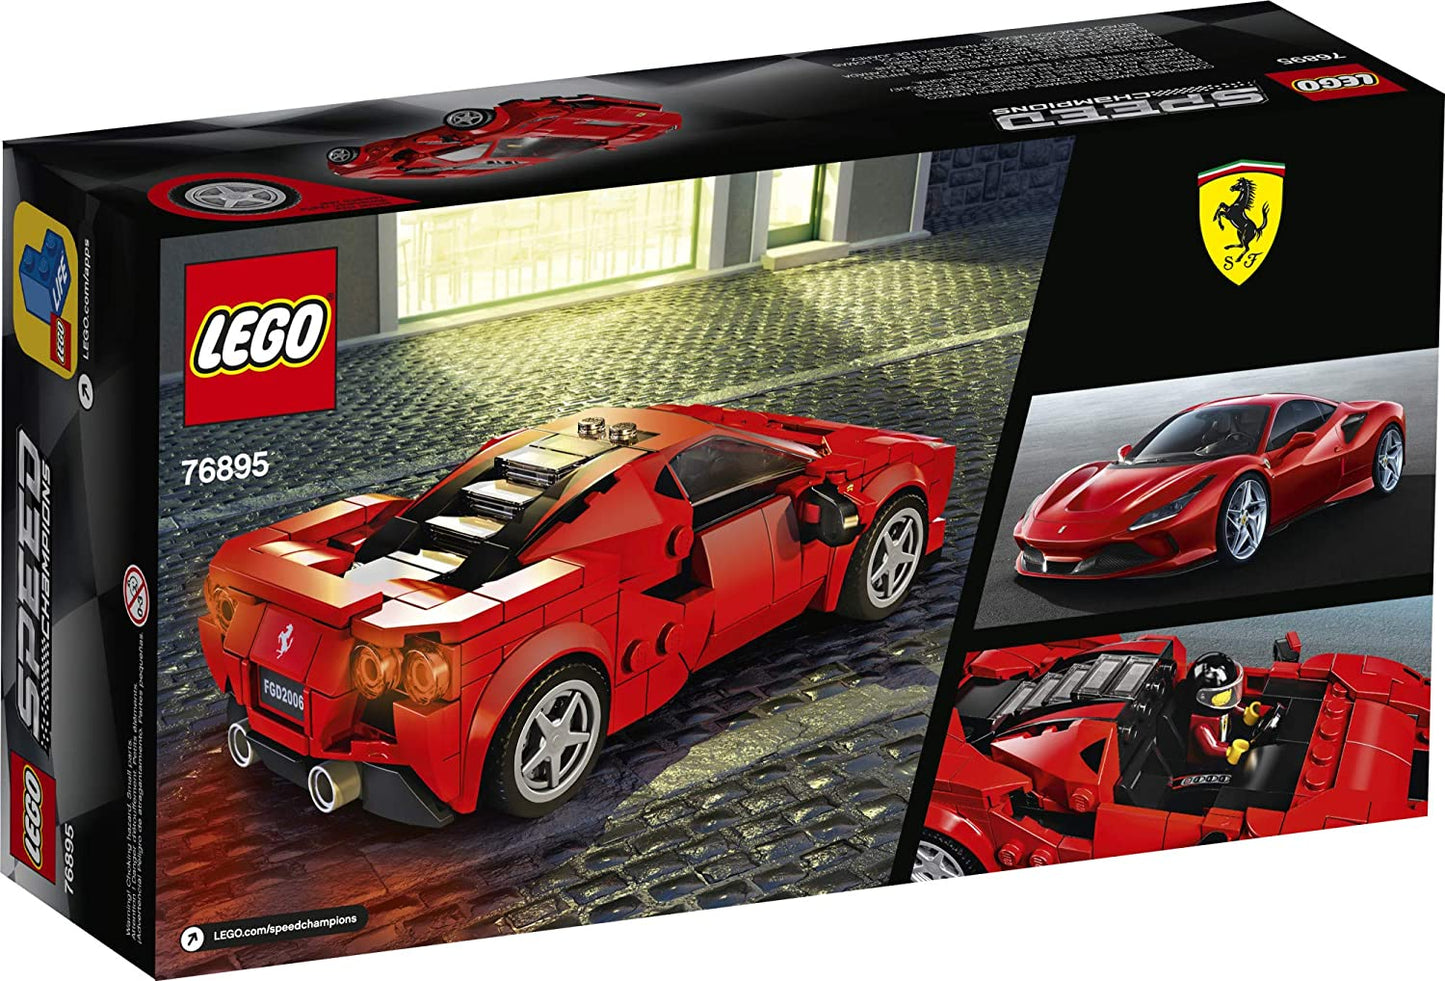 LEGO Speed Champions 76895 Ferrari F8 Tributo Toy Cars for Kids, Building Kit Featuring Minifigure, New 2020 (275 Pieces)